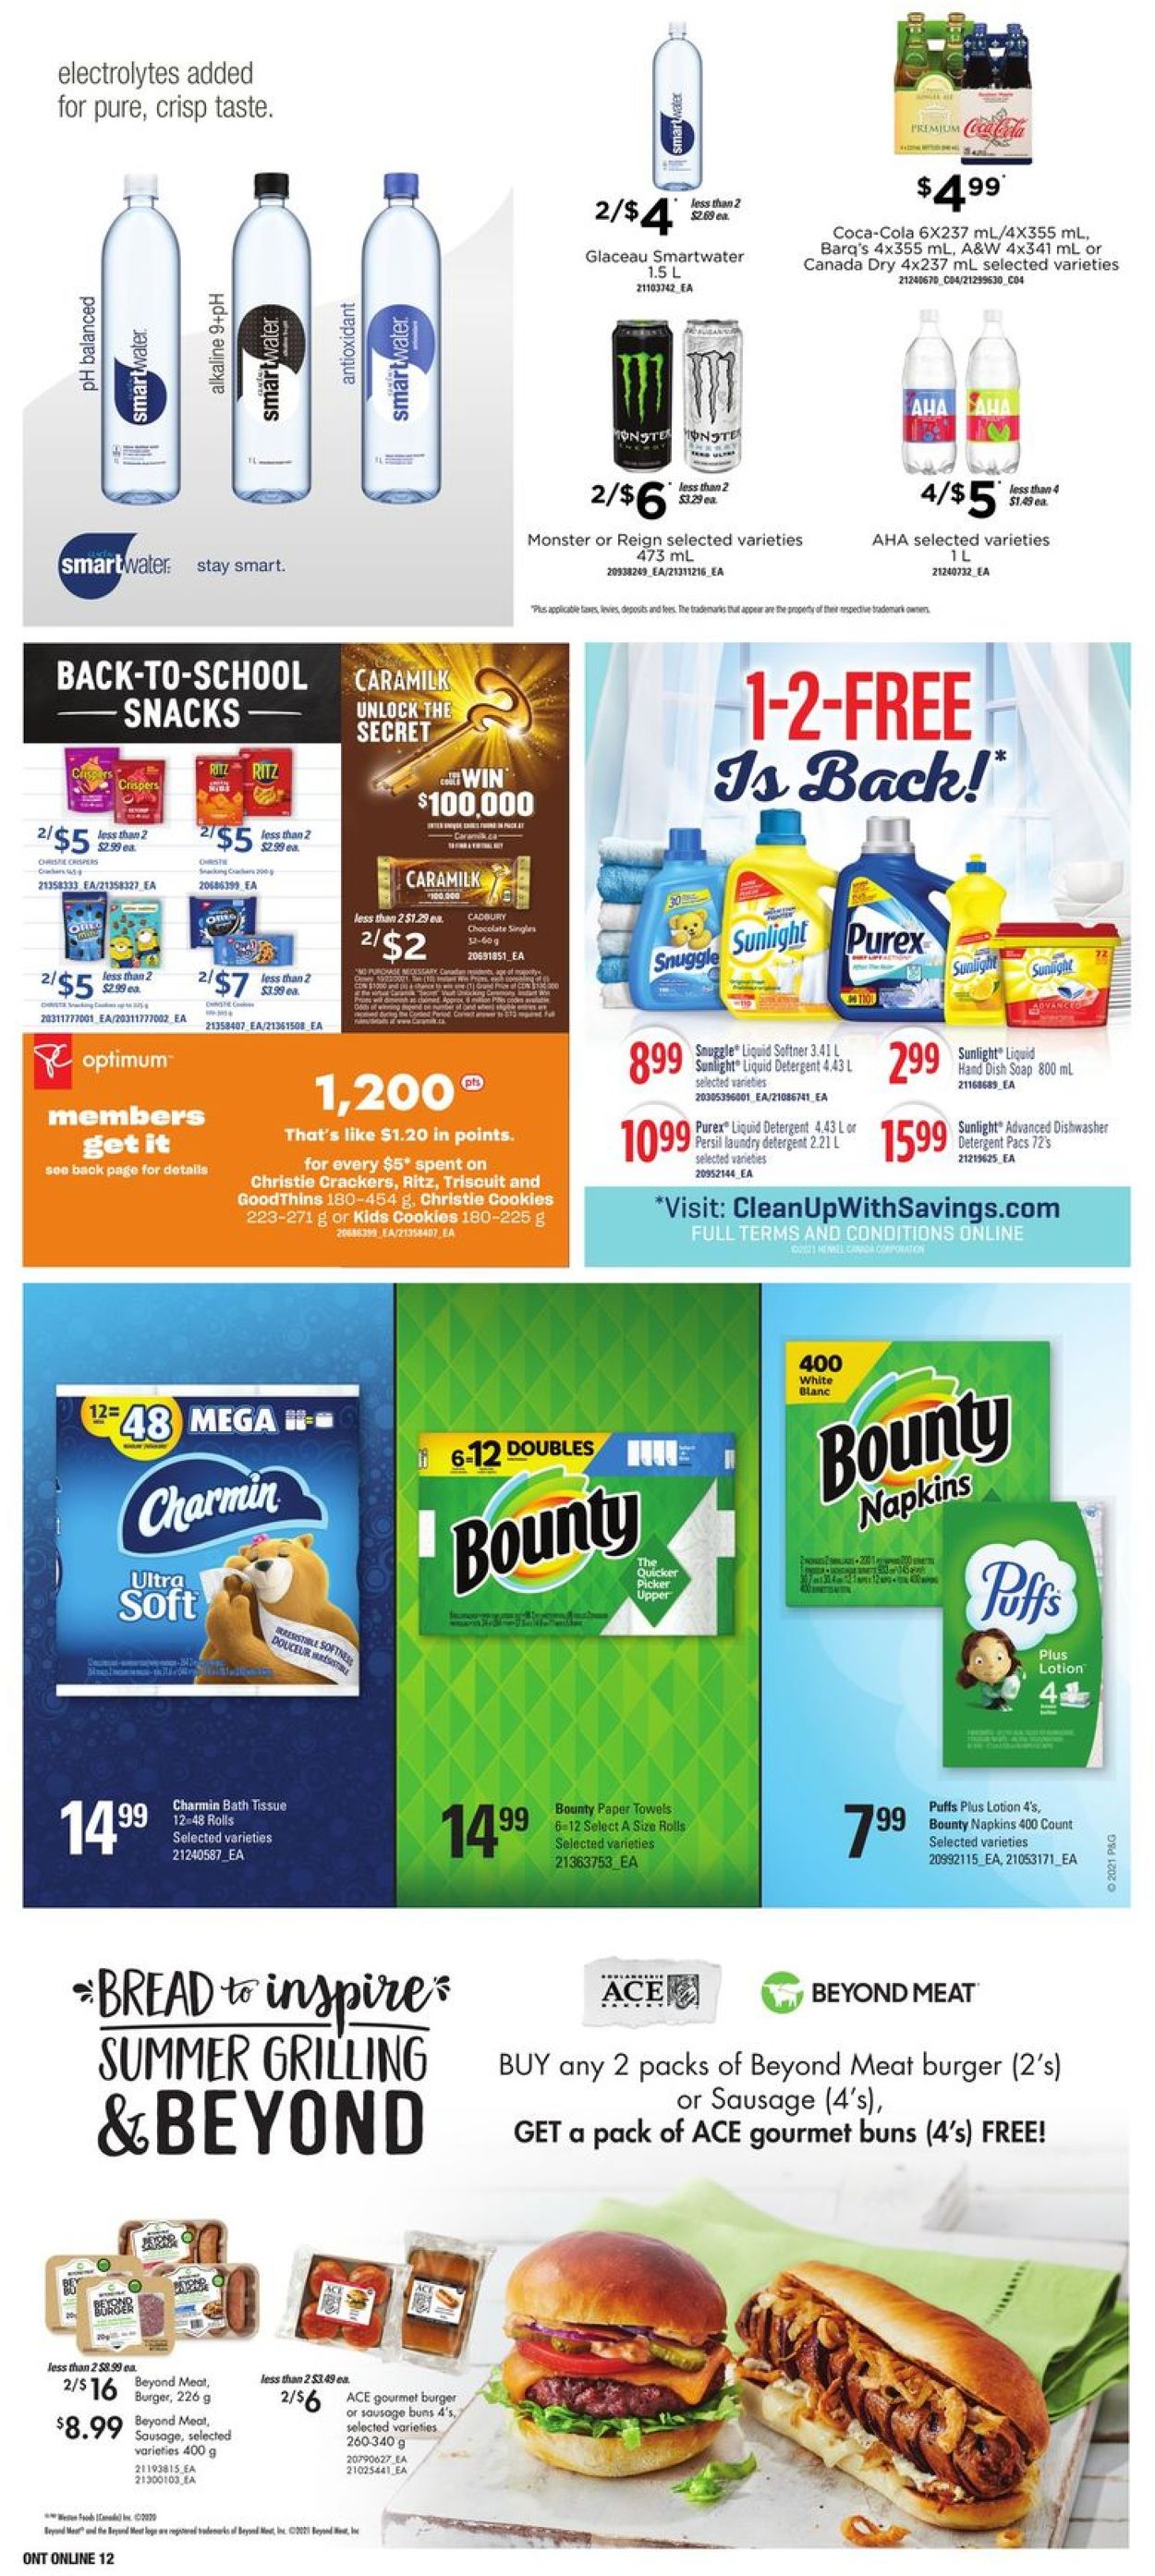 Zehrs Flyer from 09/02/2021